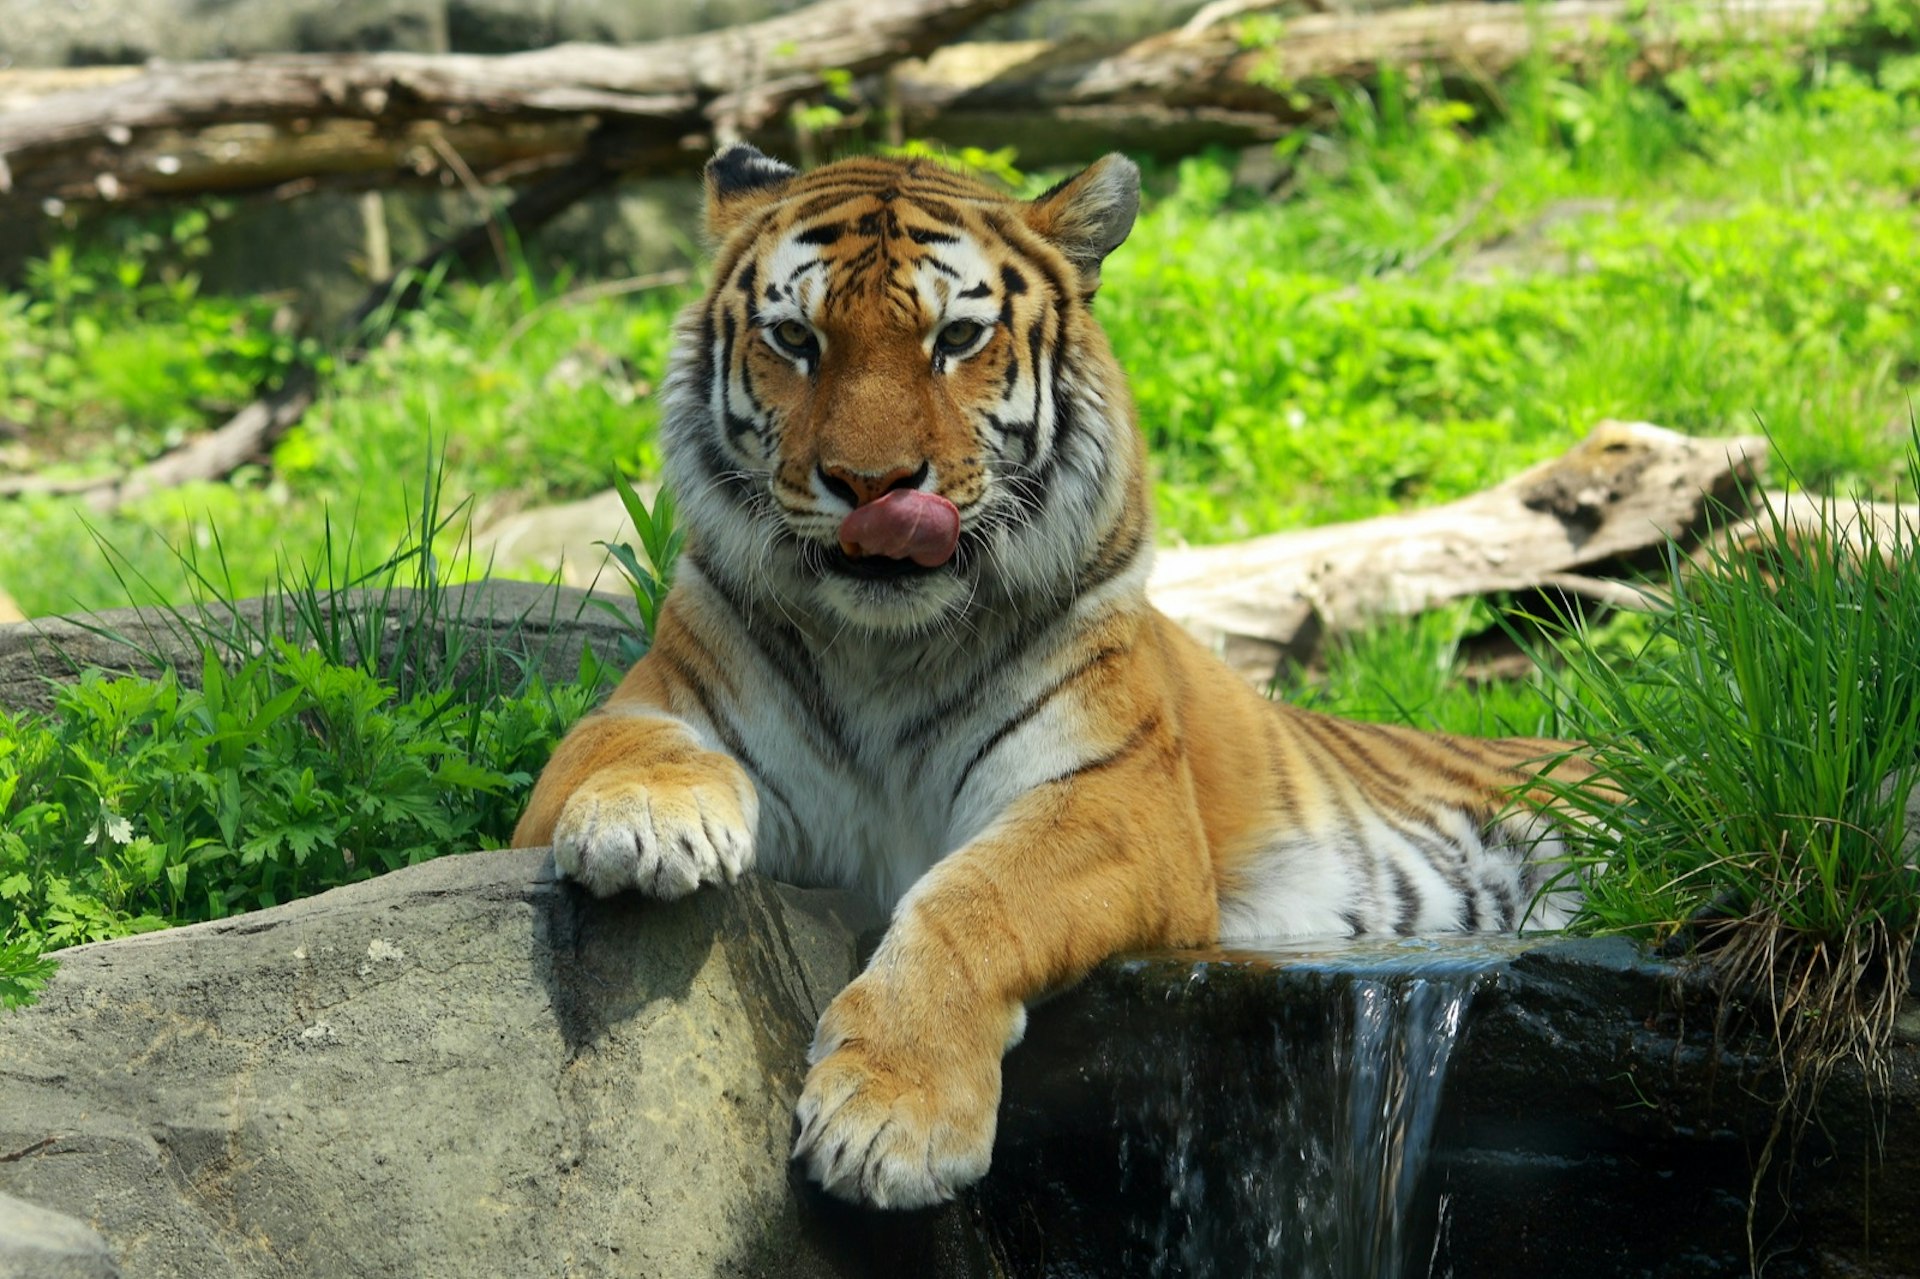 A tiger sits in a stream in a zoo enclosure in New York City